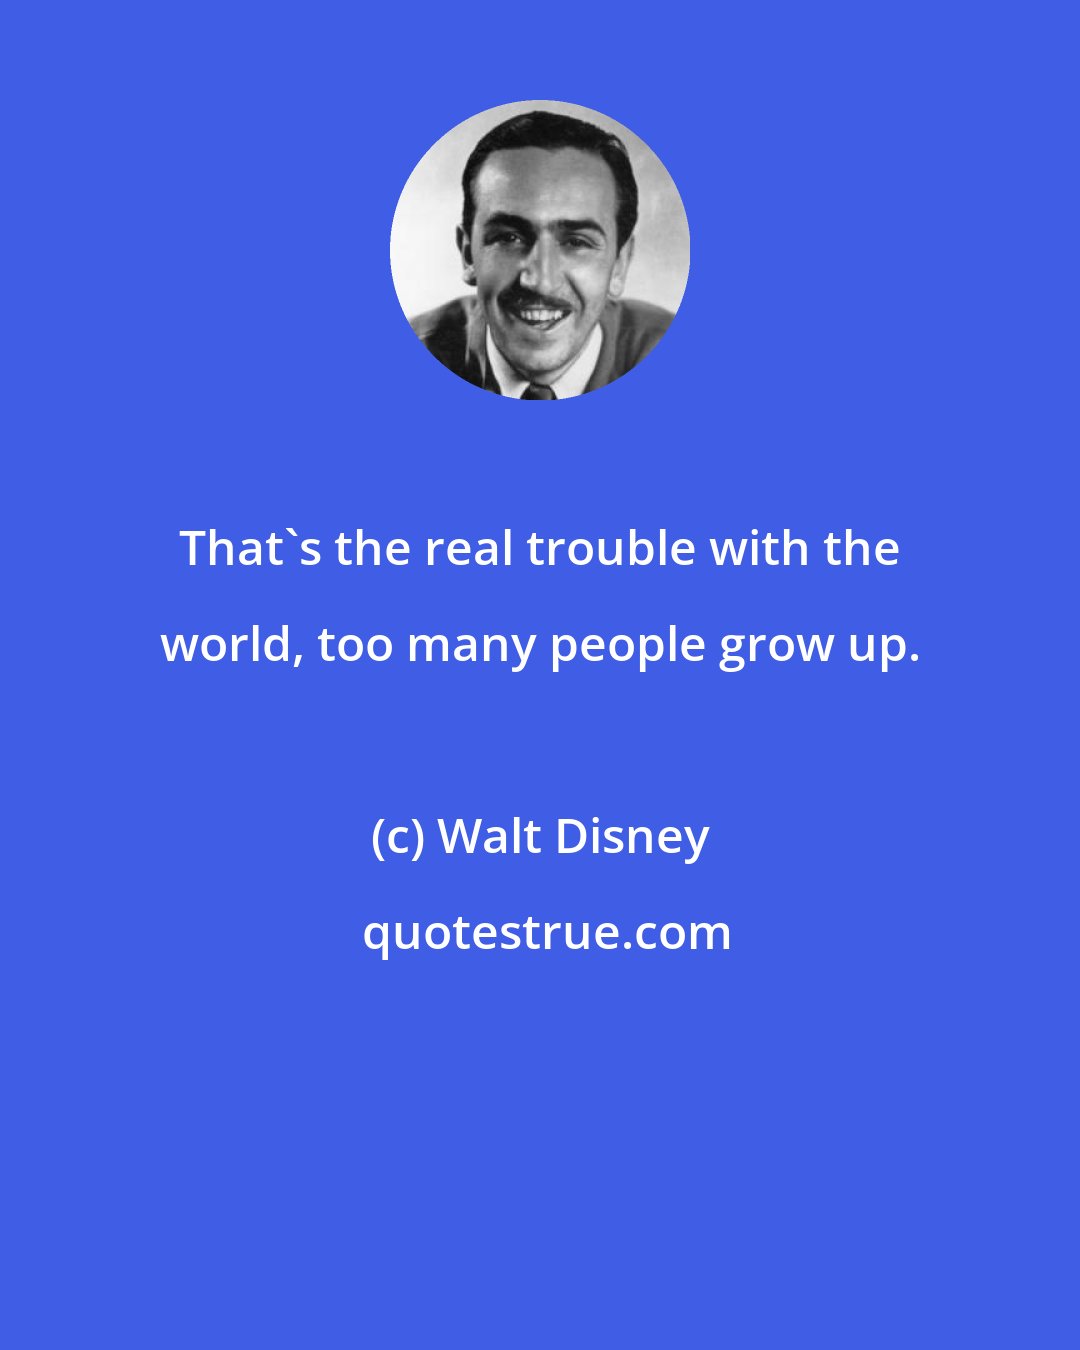 Walt Disney: That's the real trouble with the world, too many people grow up.